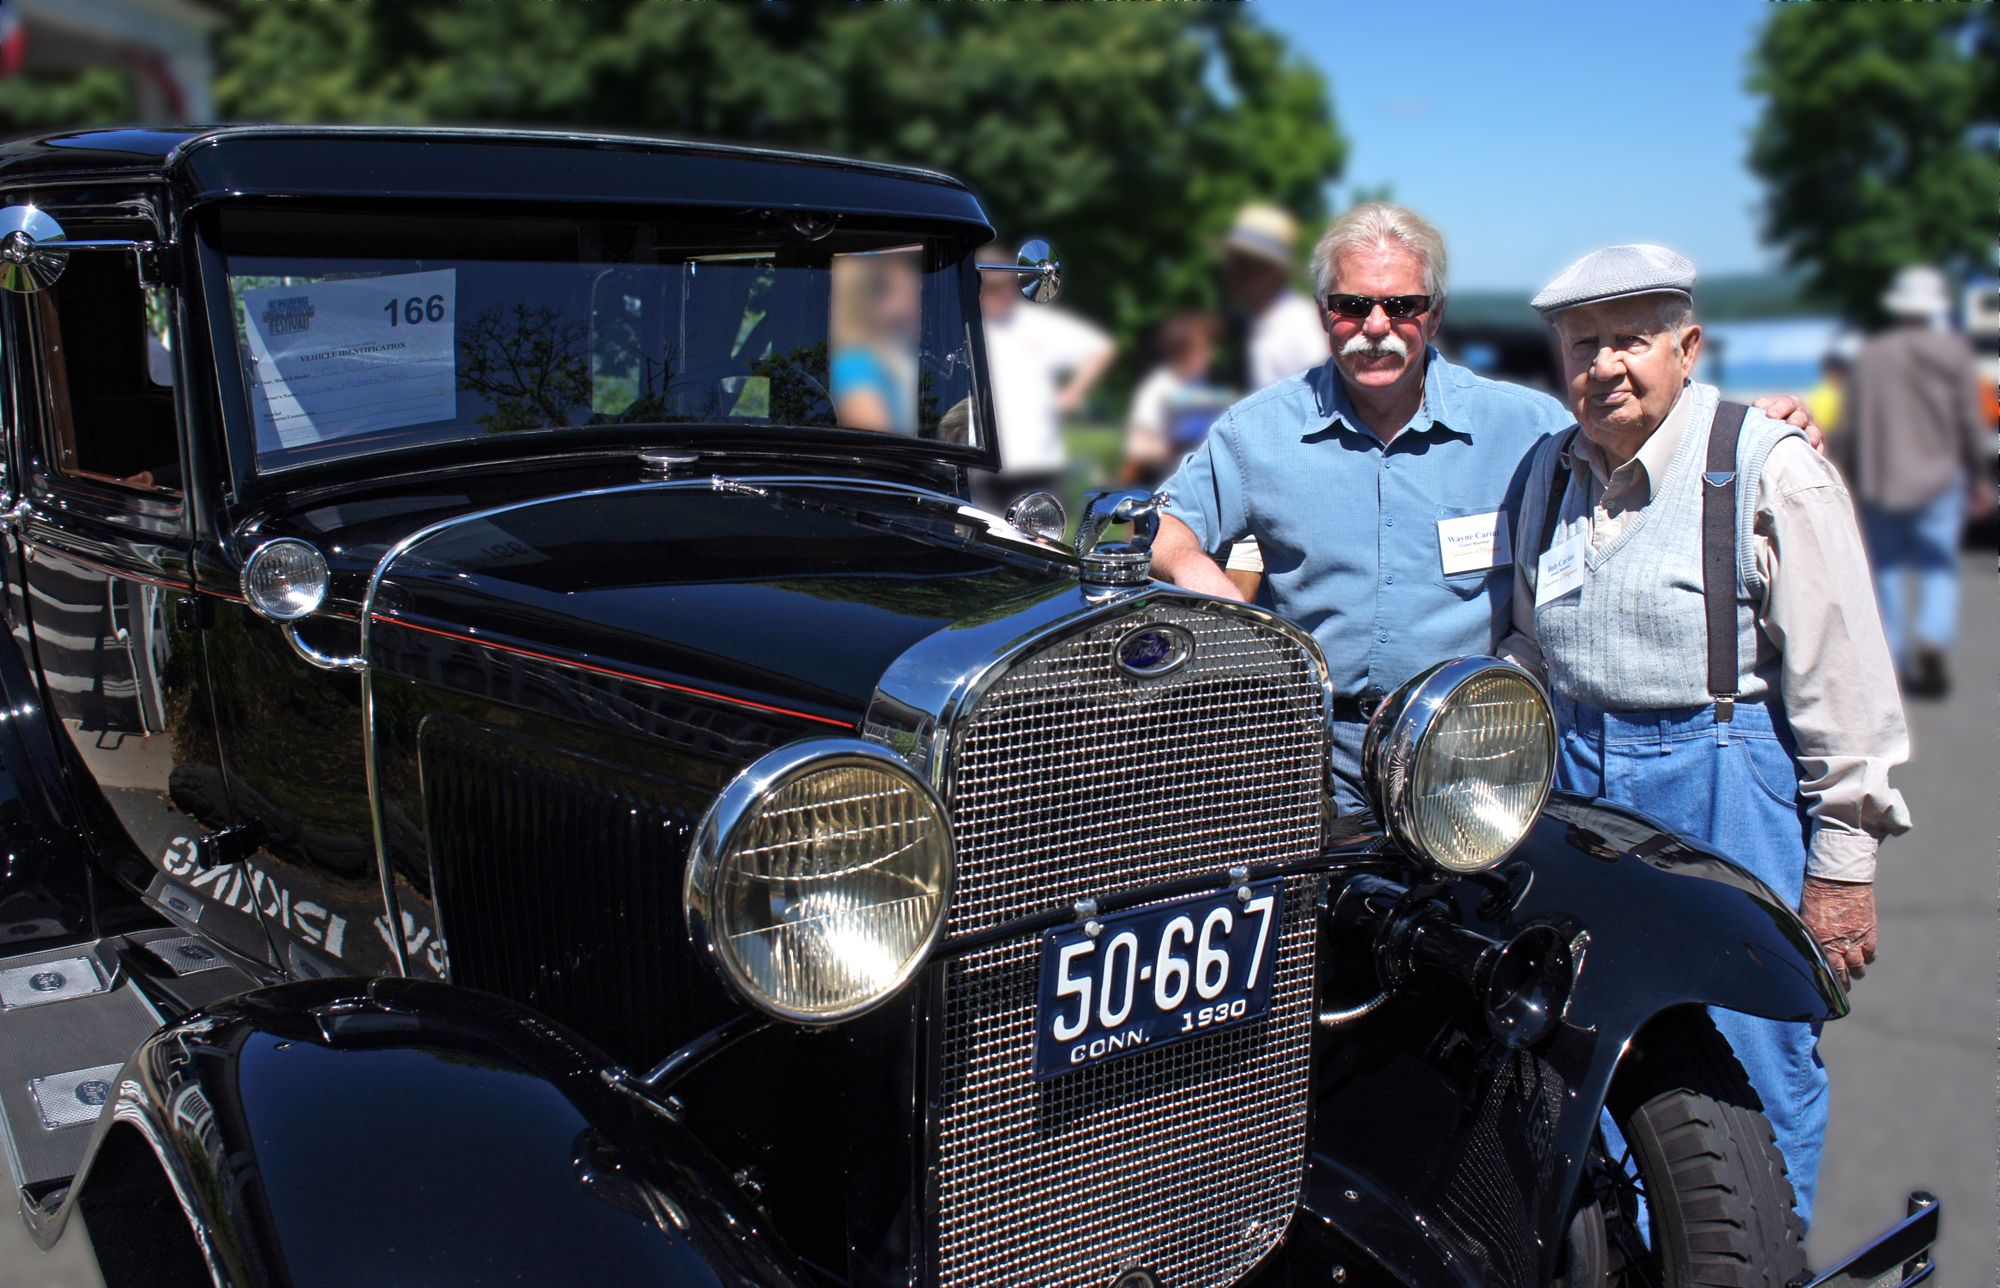 Carini Sr Founded The Very First Club For Model A Restorers